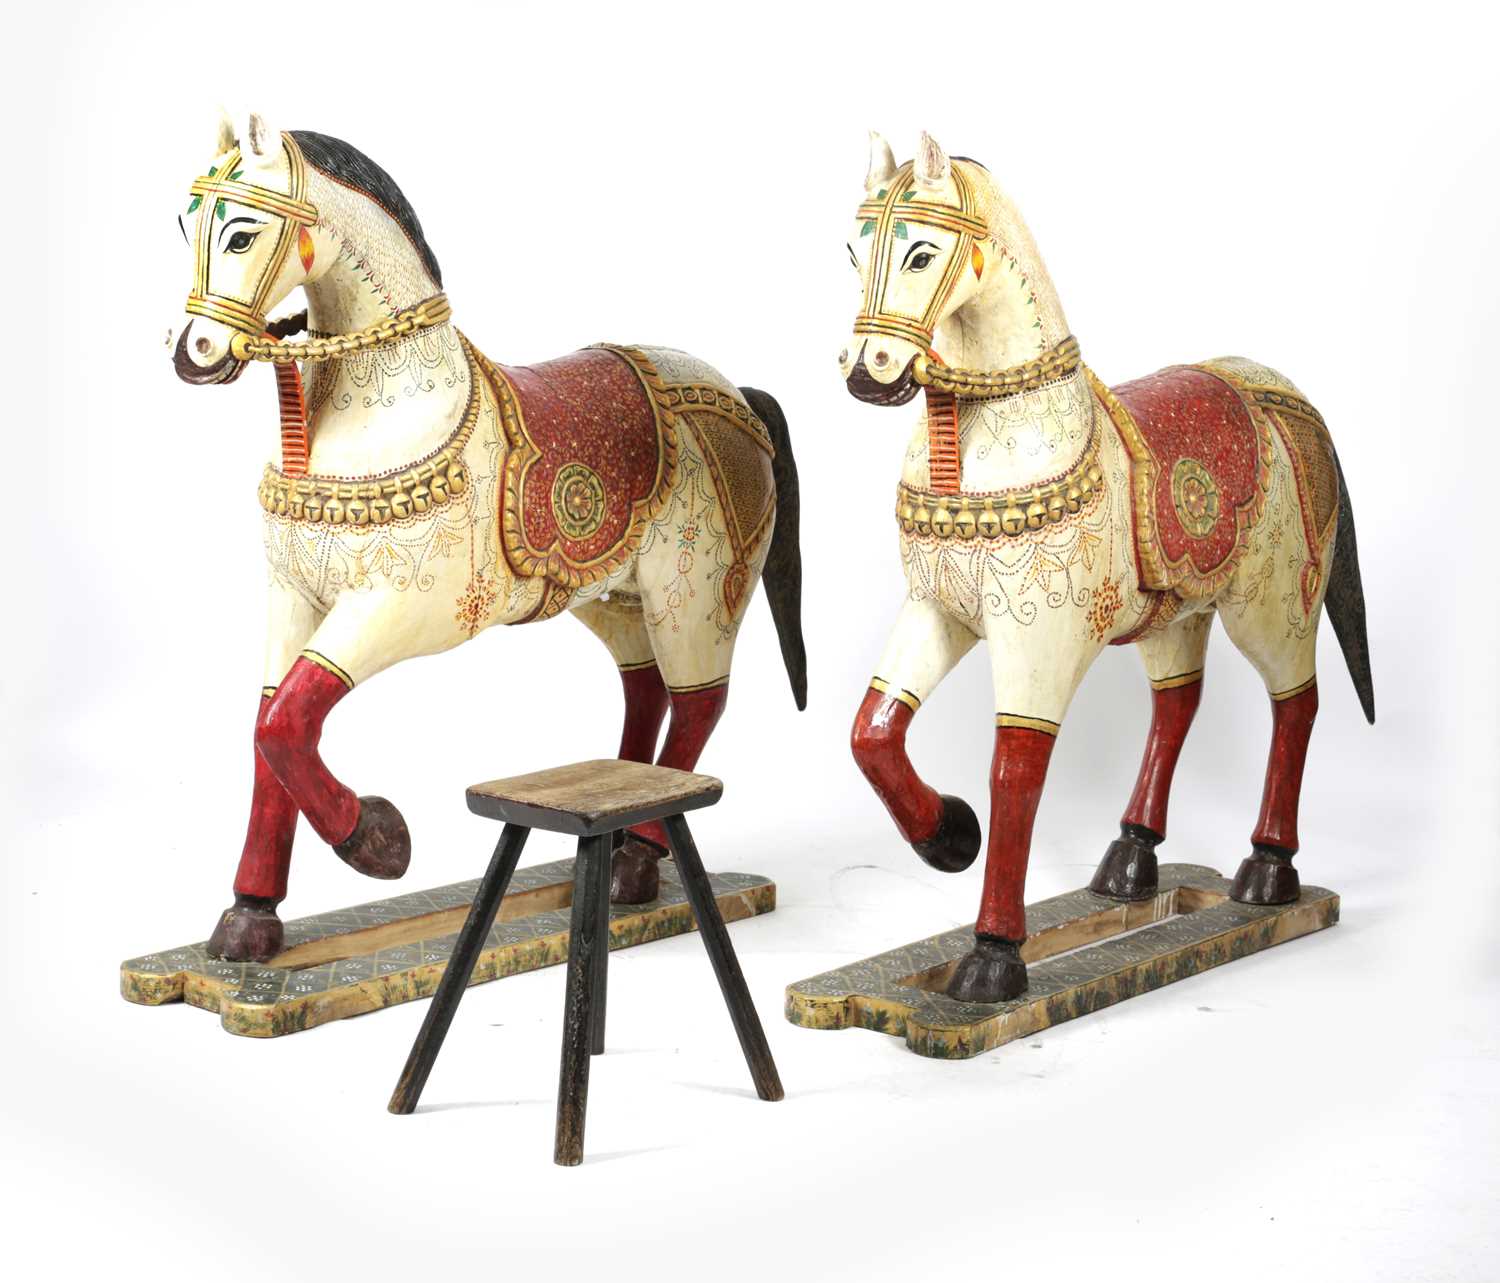 A LARGE PAIR OF INDIAN PAINTED WOOD HORSES RAJASTHAN, MID-20TH CENTURY each polychrome decorated - Image 2 of 2